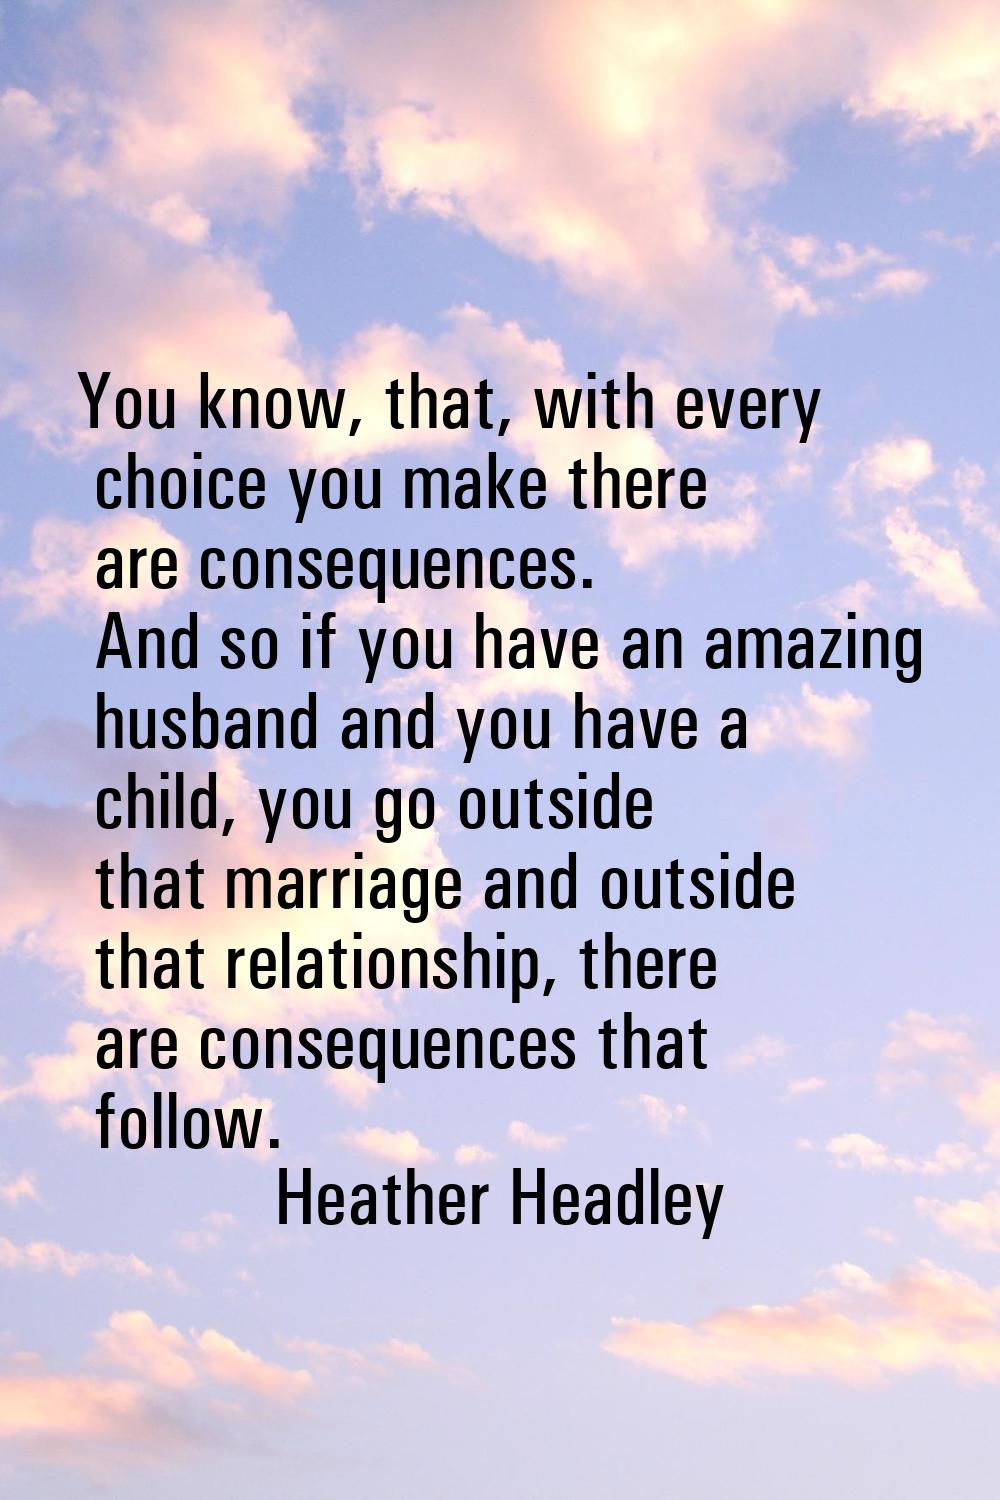 You know, that, with every choice you make there are consequences. And so if you have an amazing hu